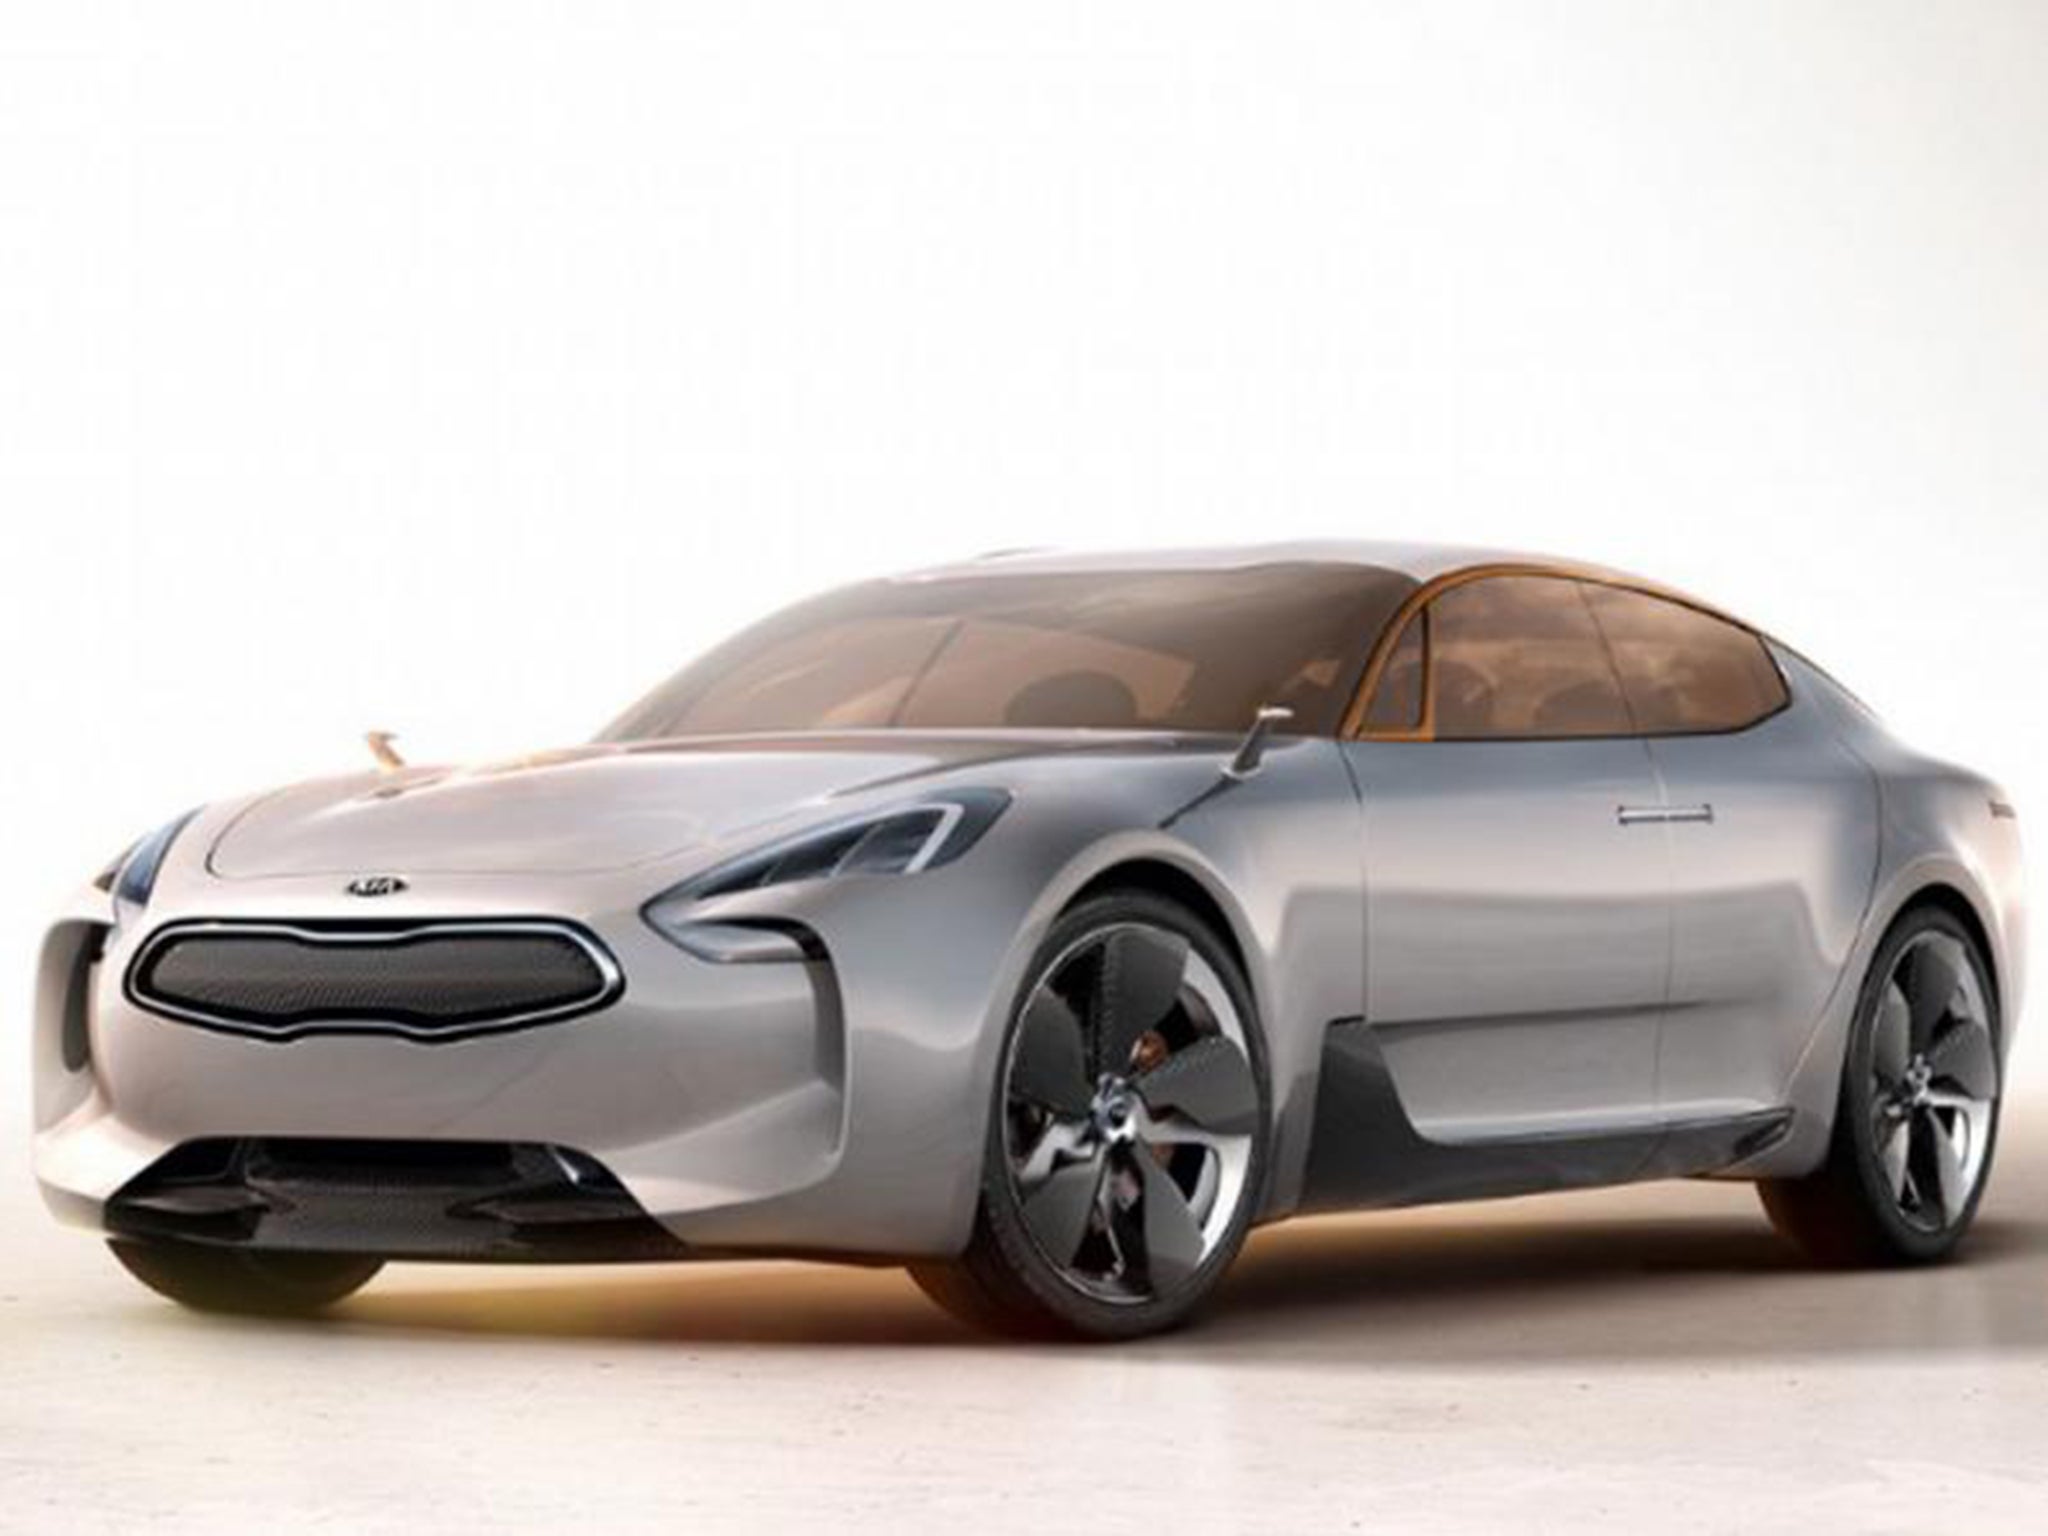 Kia plans to launch a stand-alone model simply called the GT in 2017